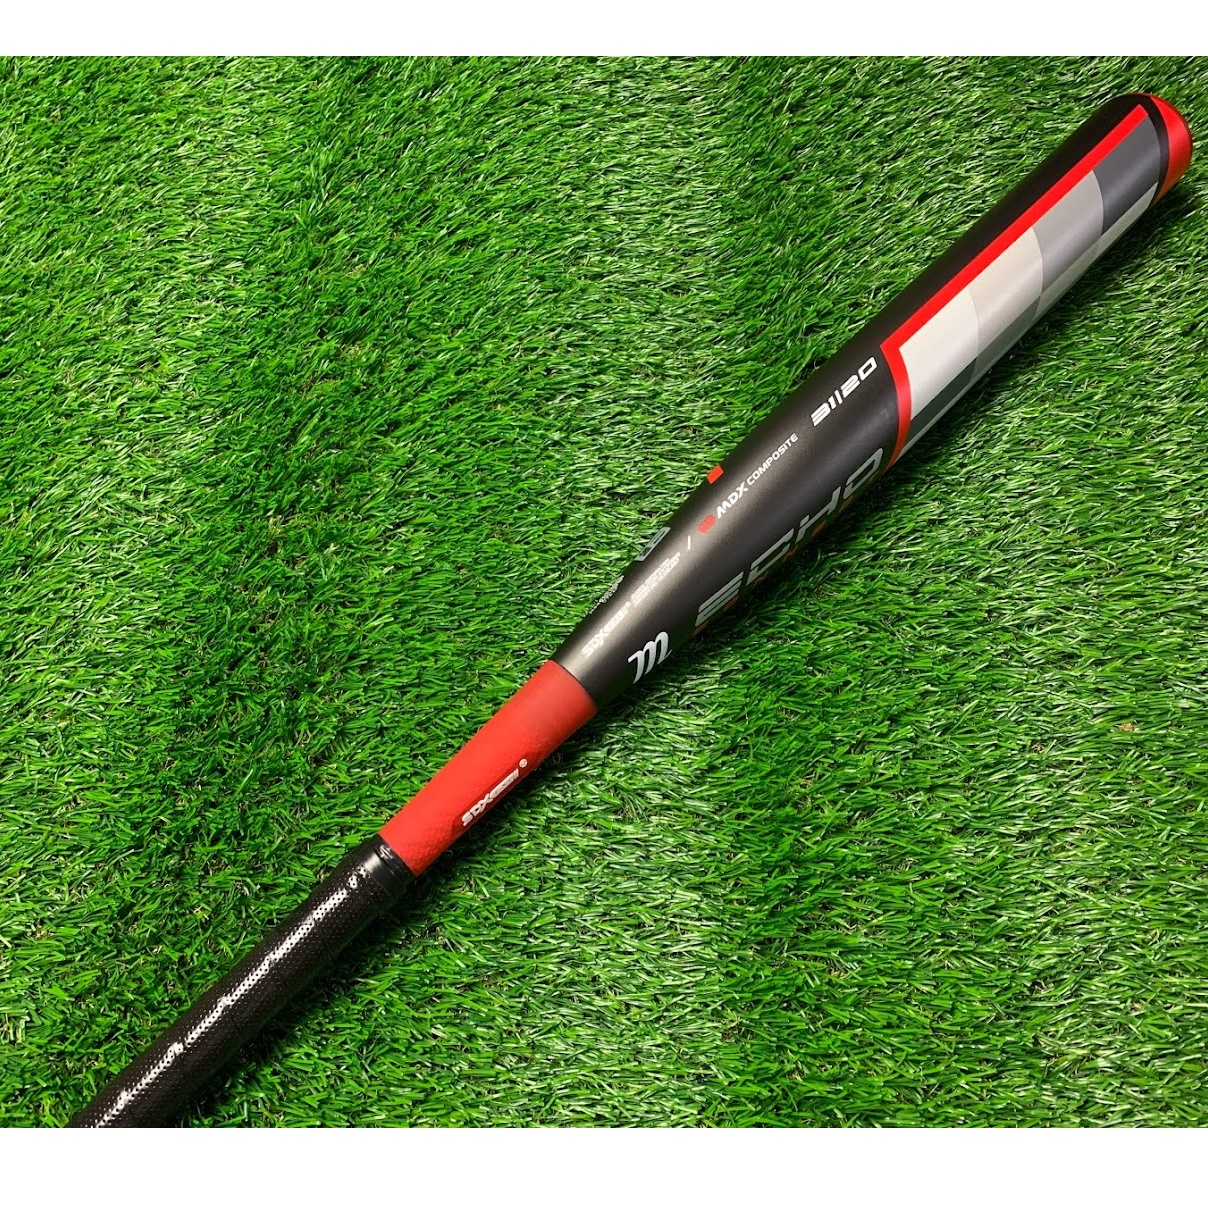 marucci-echo-connect-fast-pitch-softball-bat-31-inch-20-oz-demo MFPEC11-3120-DEMO Marucci  Demo bats are a great opportunity to pick up a high